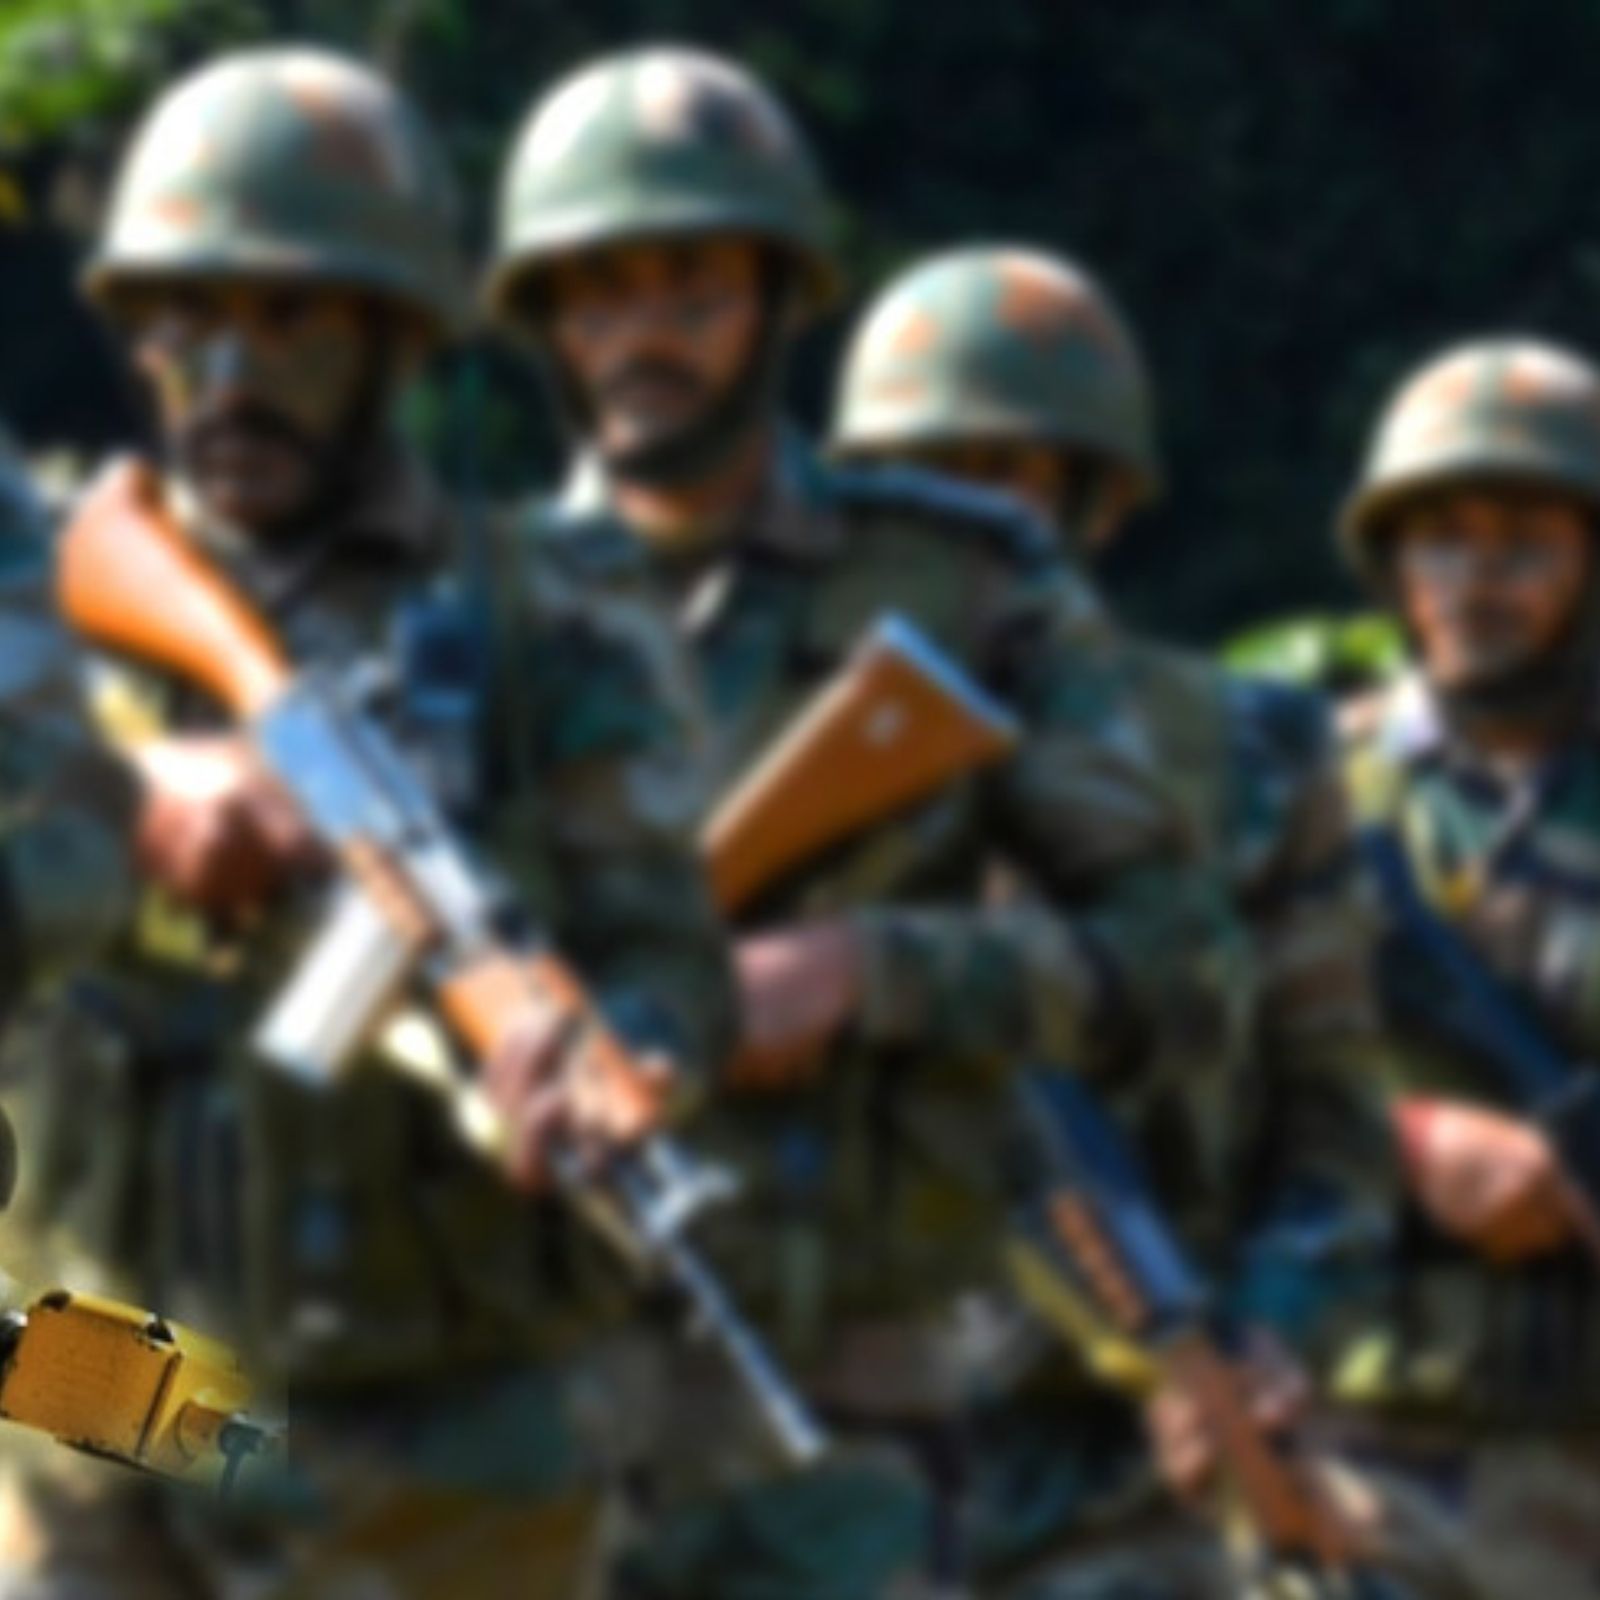 Software Engineer From Bengaluru Joins Indian Army At 39, Shares Inspiring Journey